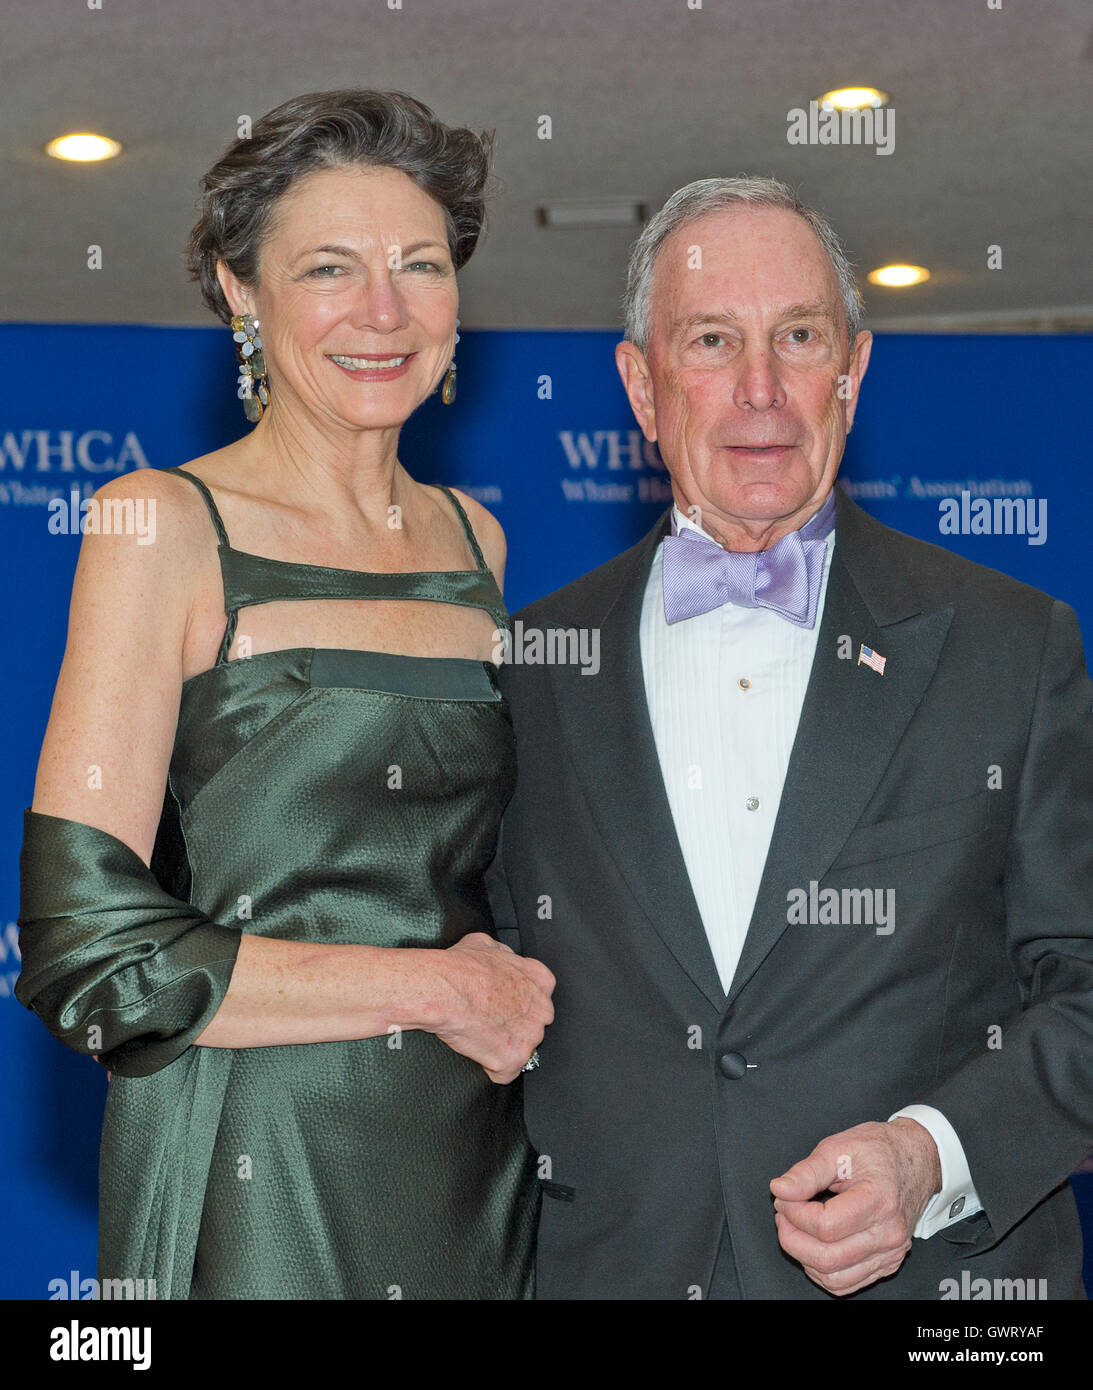 Michael Bloomberg, right, and Diana Taylor arrive for the 2015 White House Correspondents Association Annual Dinner at the Washington Hilton Hotel on Saturday, April 25, 2015. Credit: Ron Sachs / CNP /MediaPunch Stock Photo